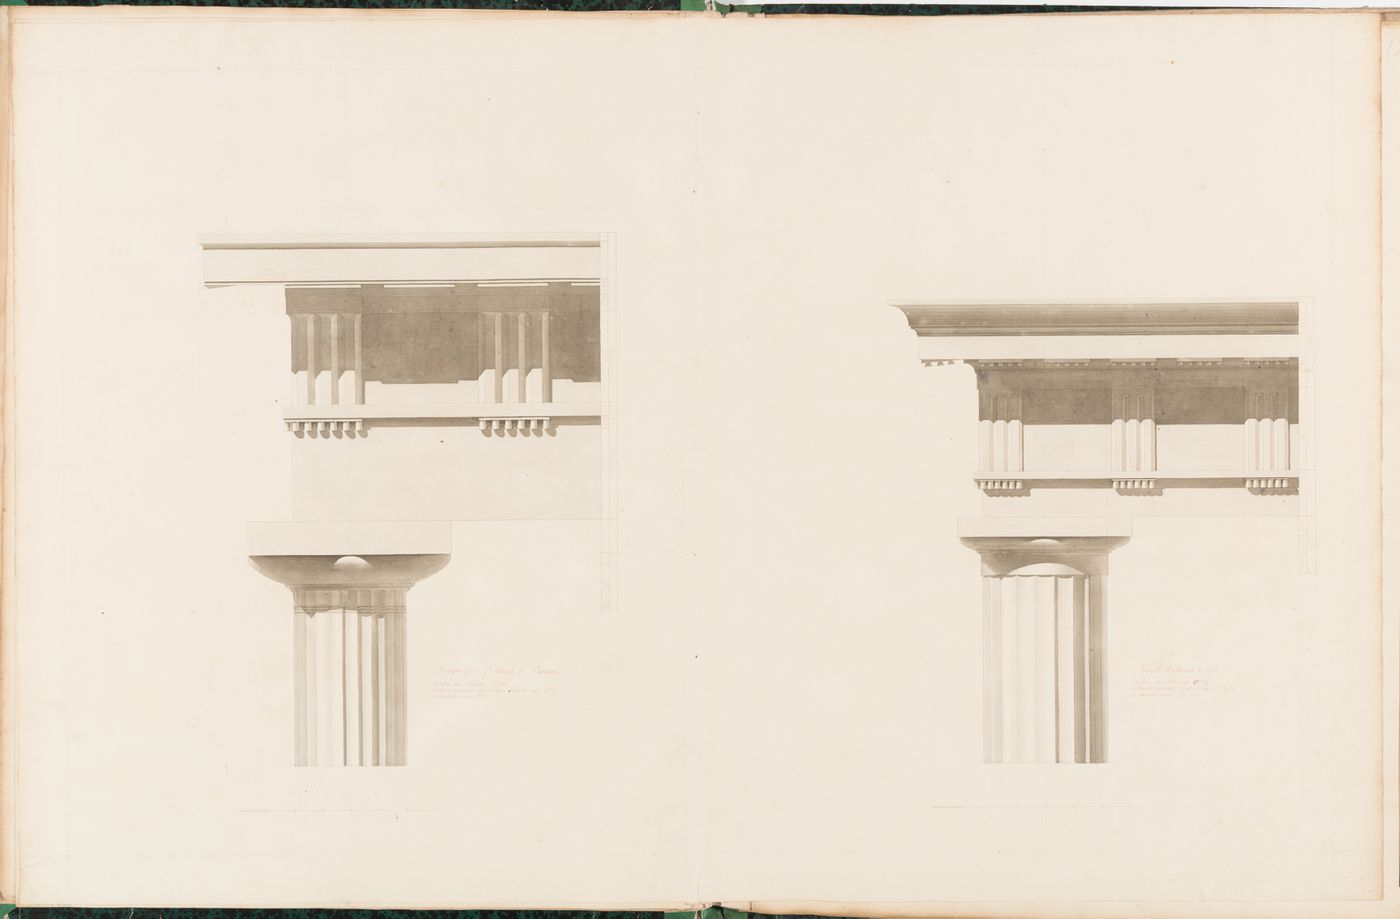 Elevations of columns and entablatures from two Greek Doric temples: Temple of Neptune, Paestum and the Temple of Hercules, Cori